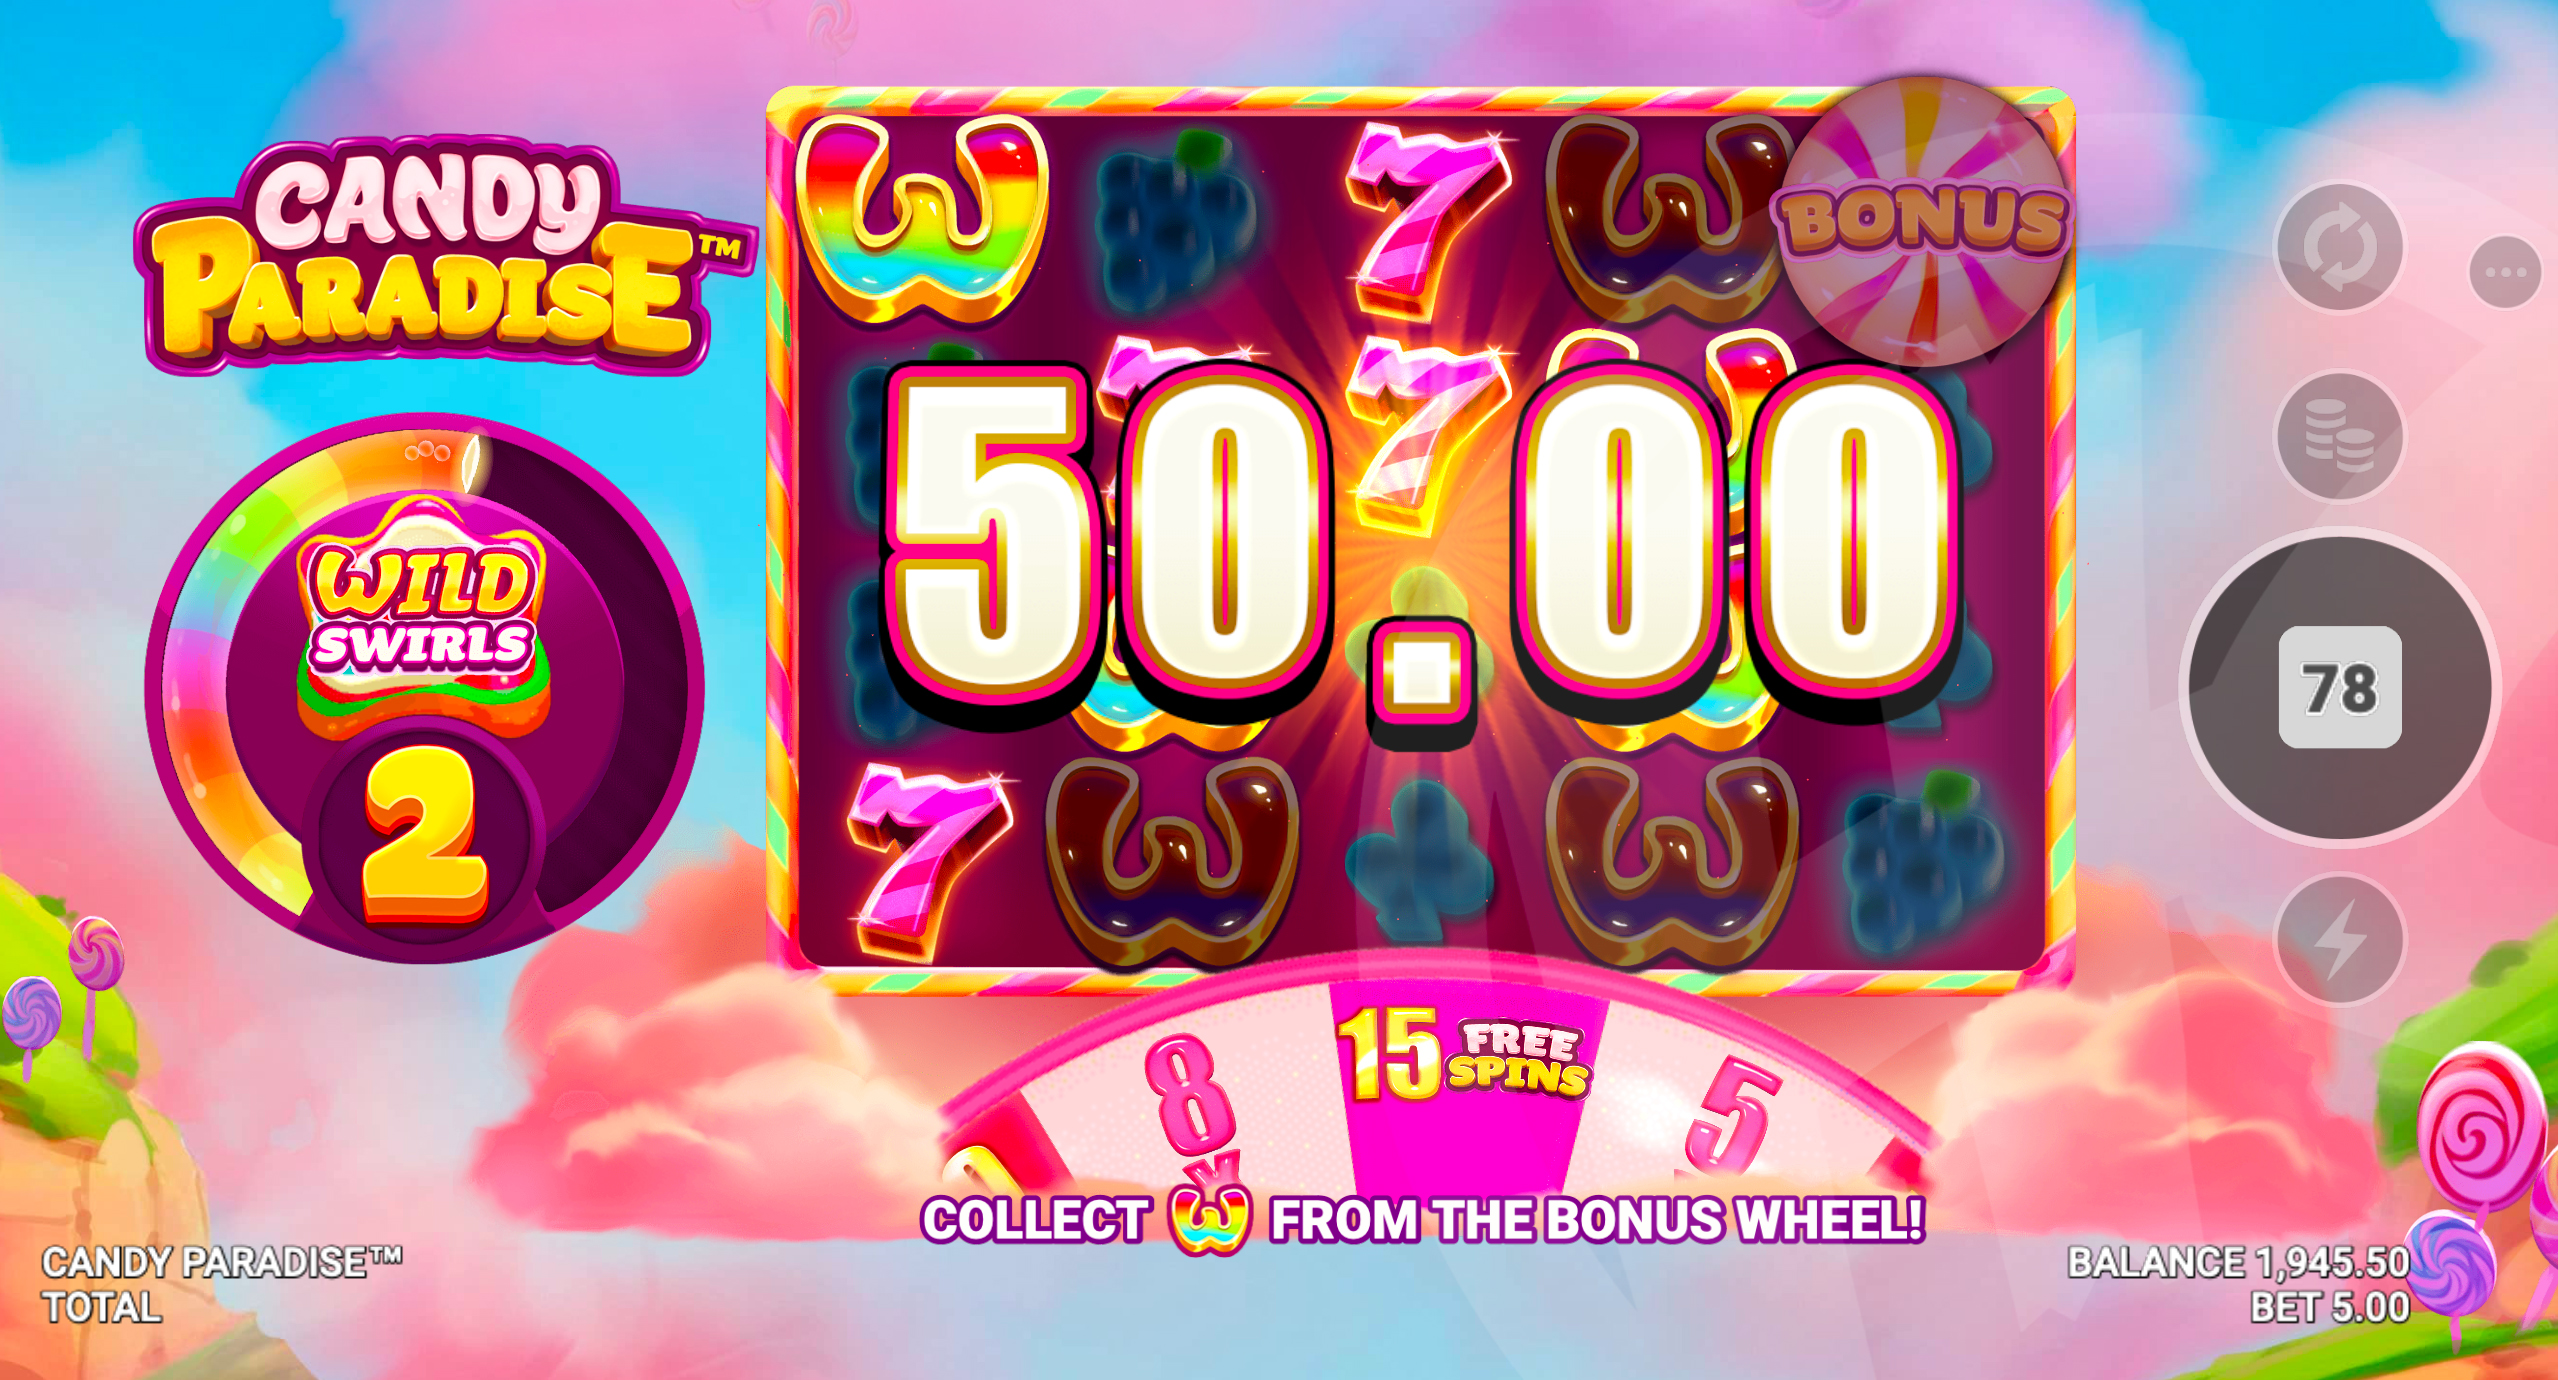 Candy Paradise Offers Players 30 Fixed Win Lines